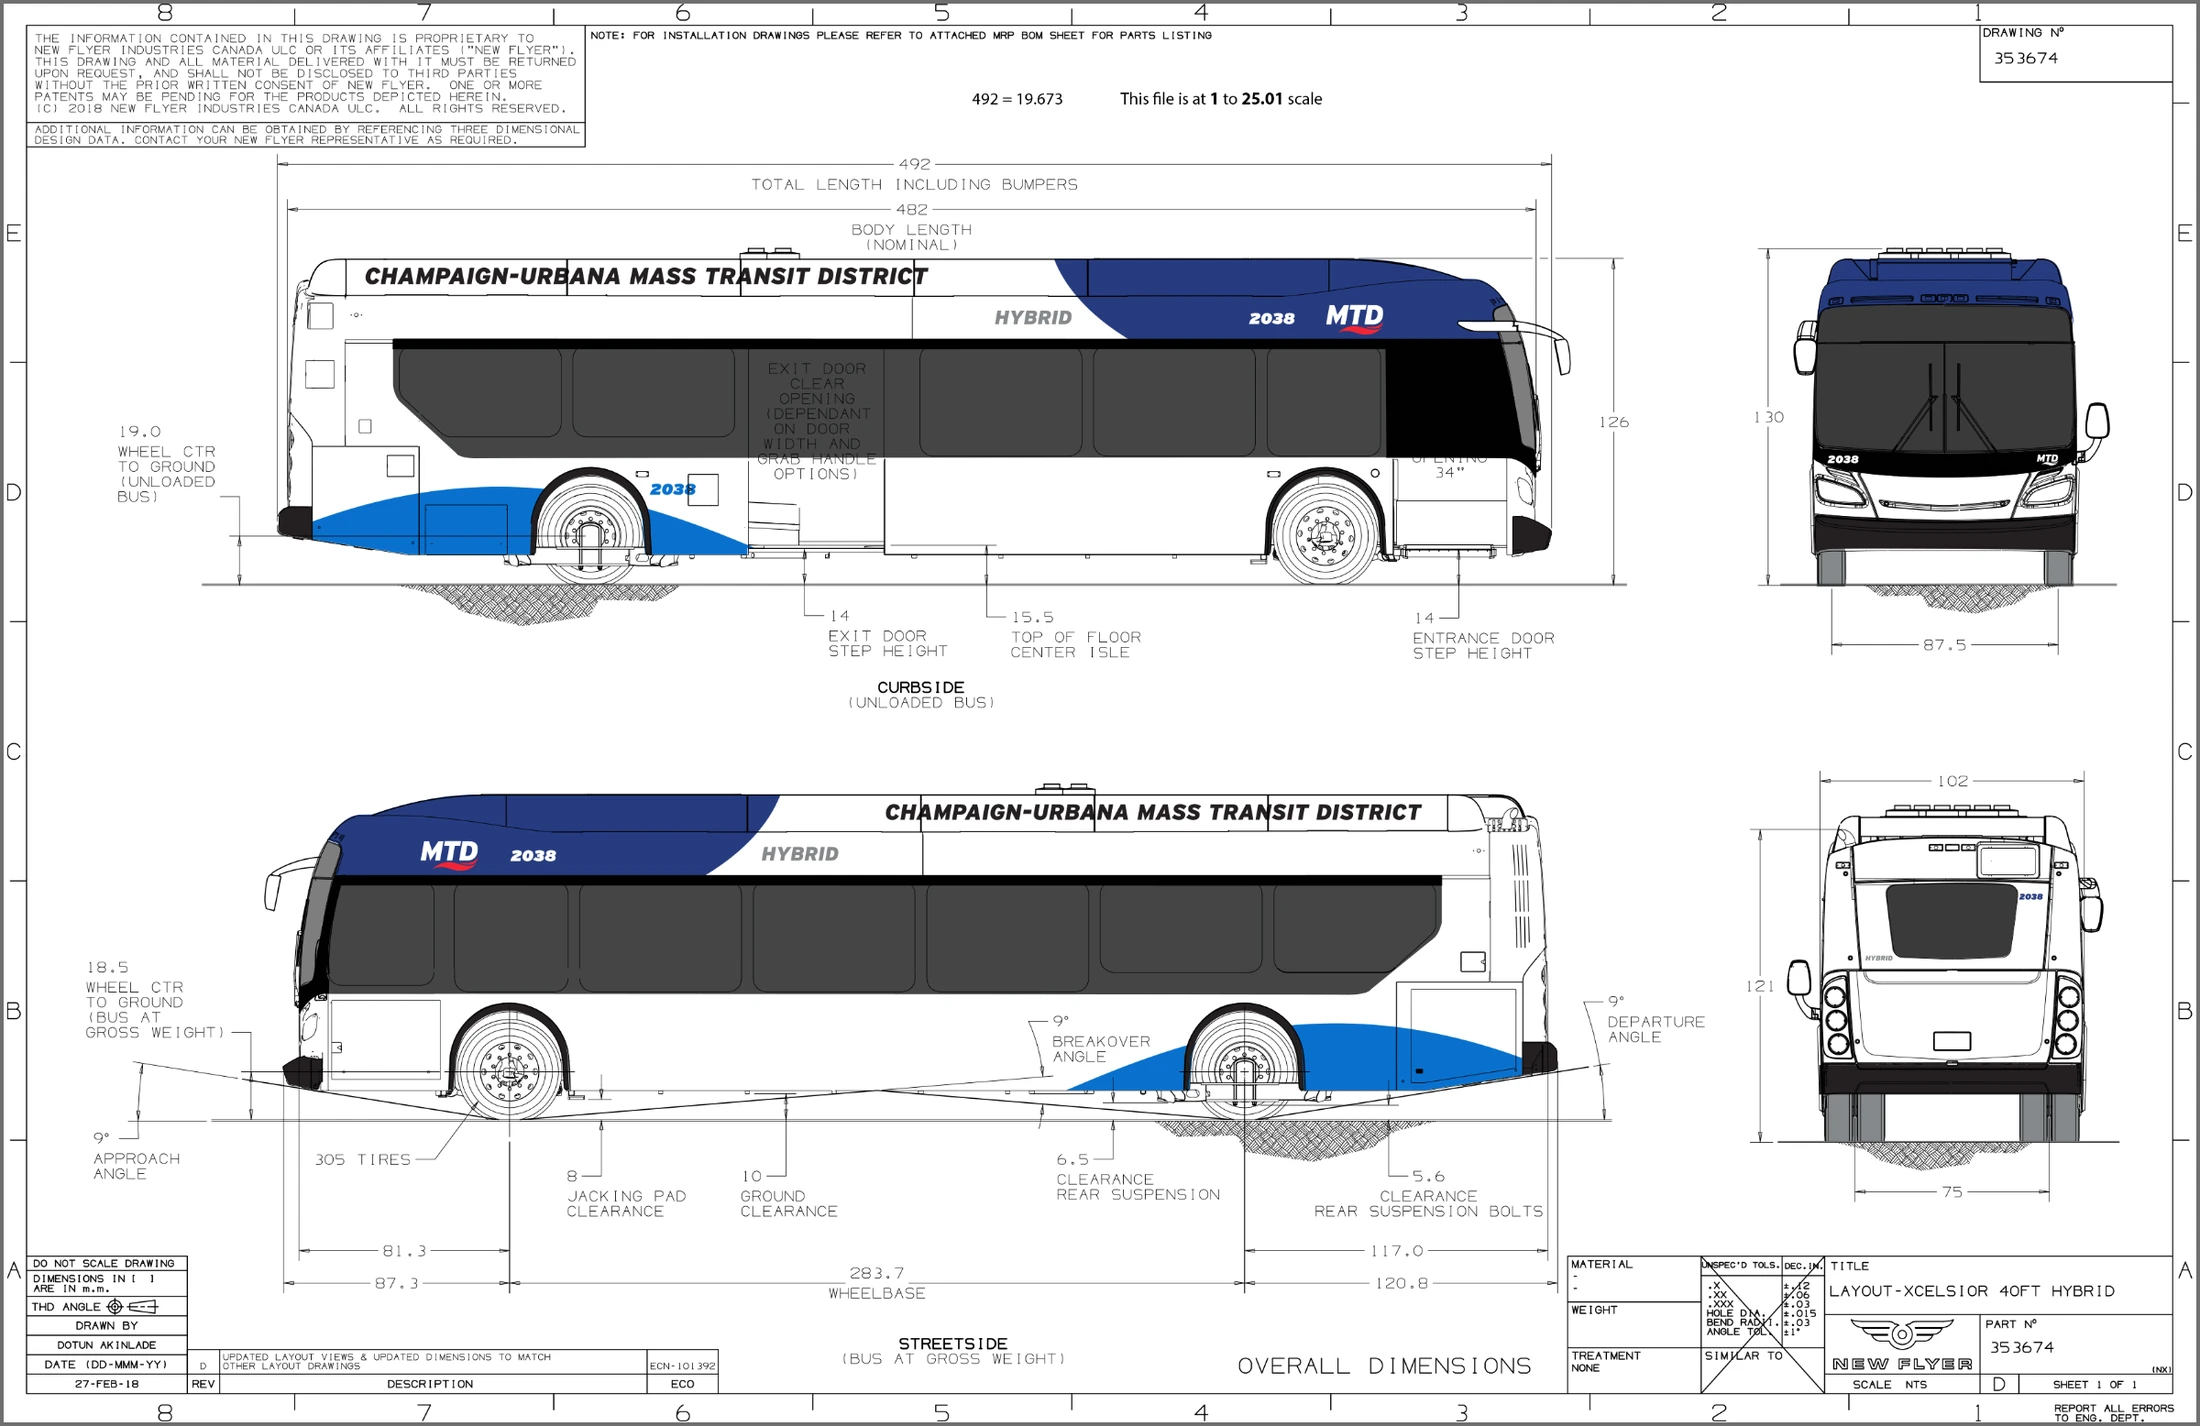 A drawing of a bus with a blue and white design.